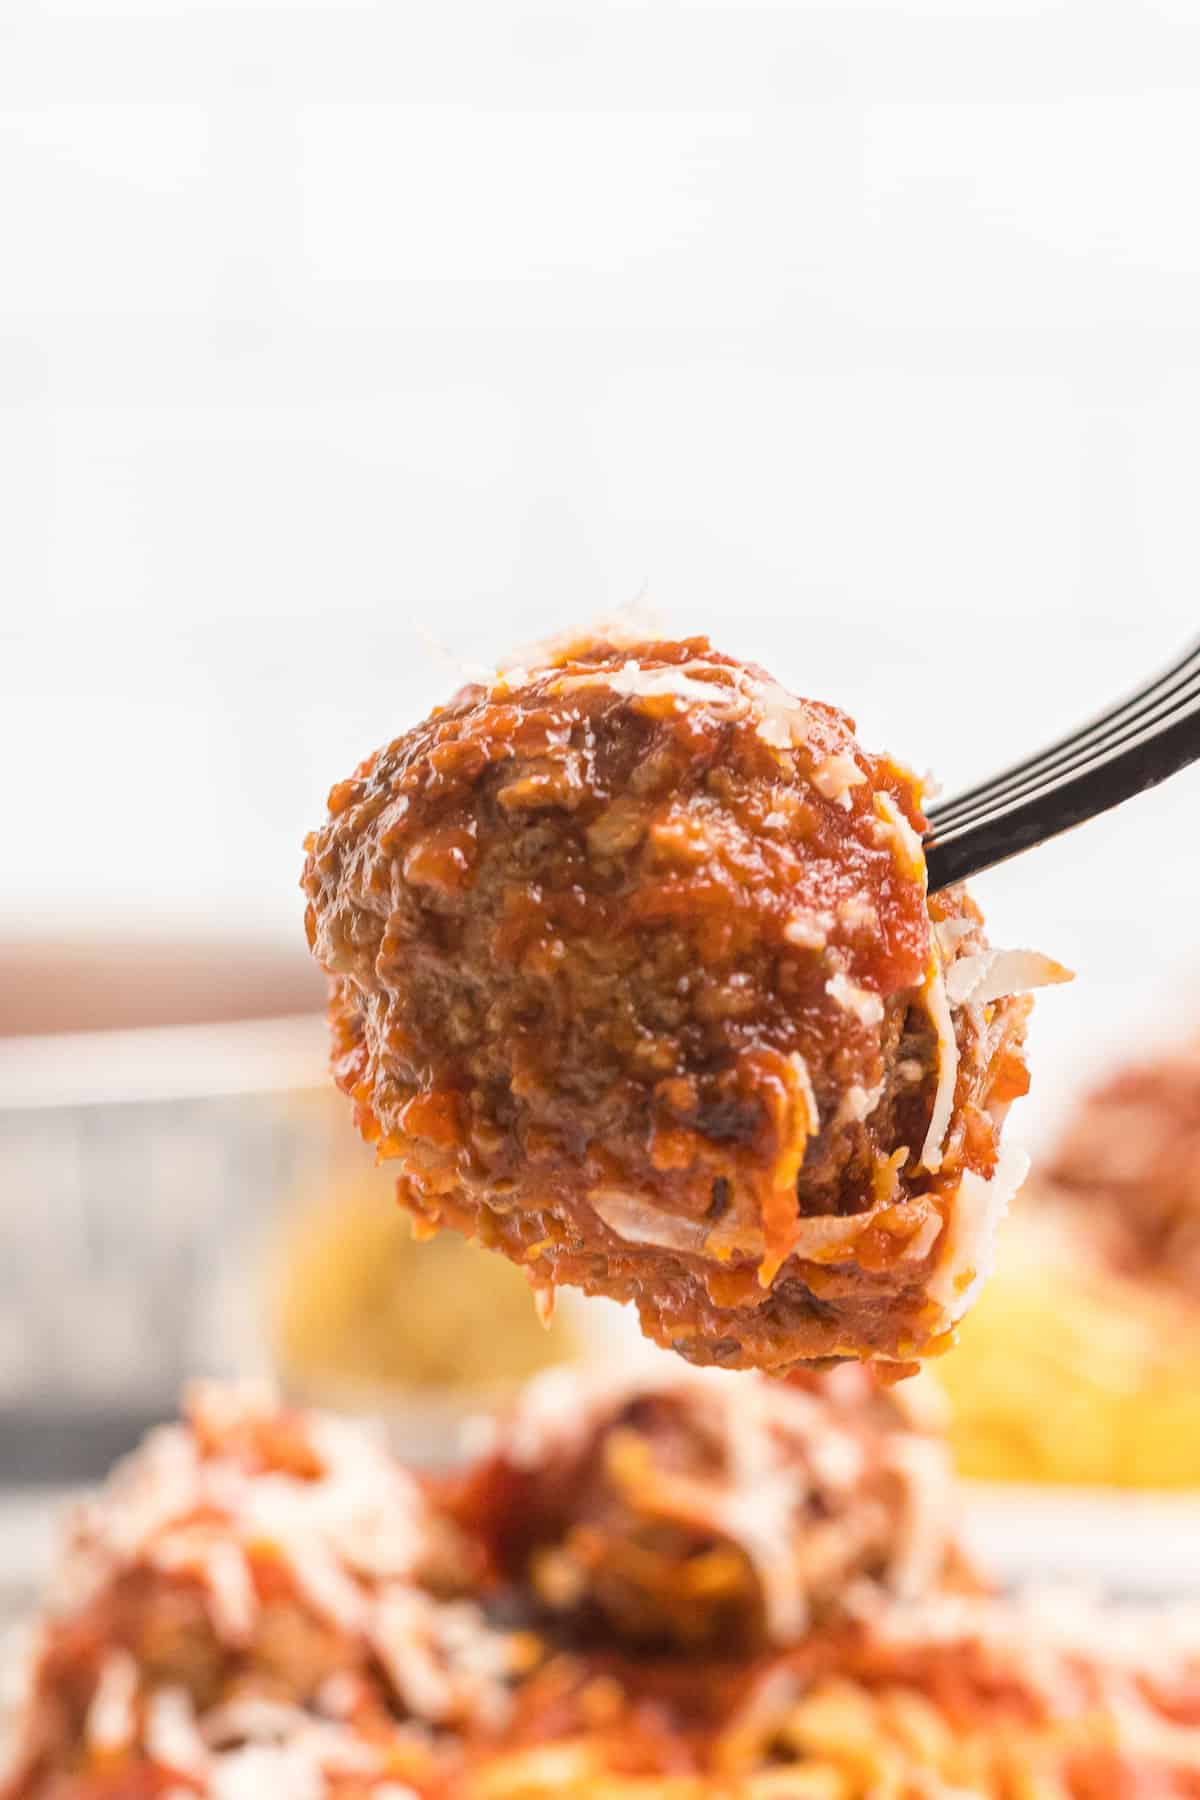 meatball on a fork over plate full of meatballs and pasta.